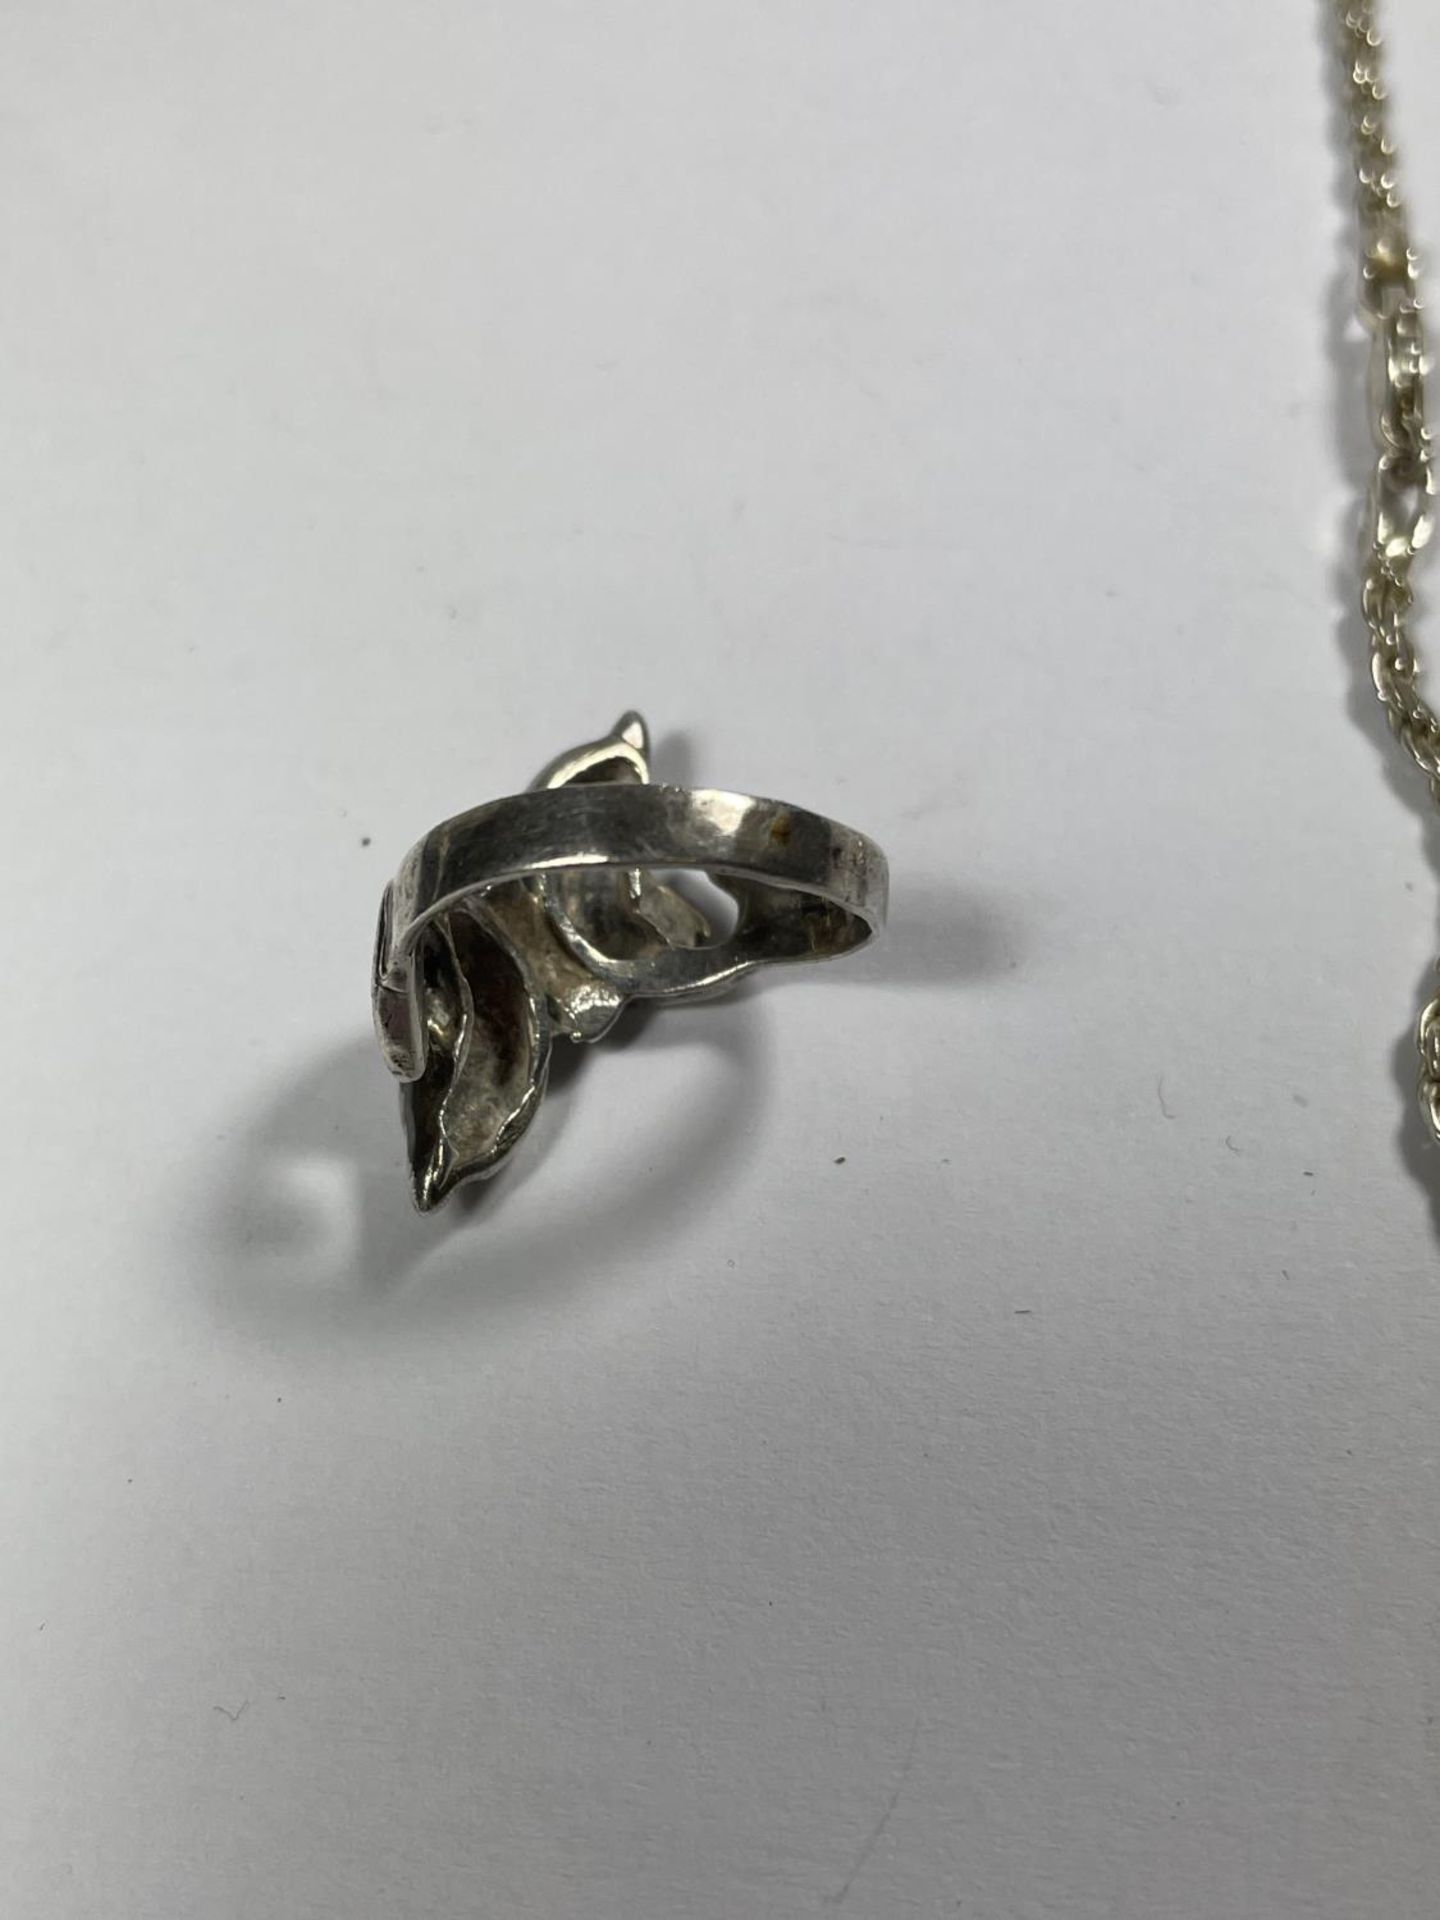 A SILVER NECKLACE WITH A DOUBLE DOLPHIN AND CLEAR STONE PENDANT AND A DOUBLE DOLPHIN RING IN A - Image 5 of 5